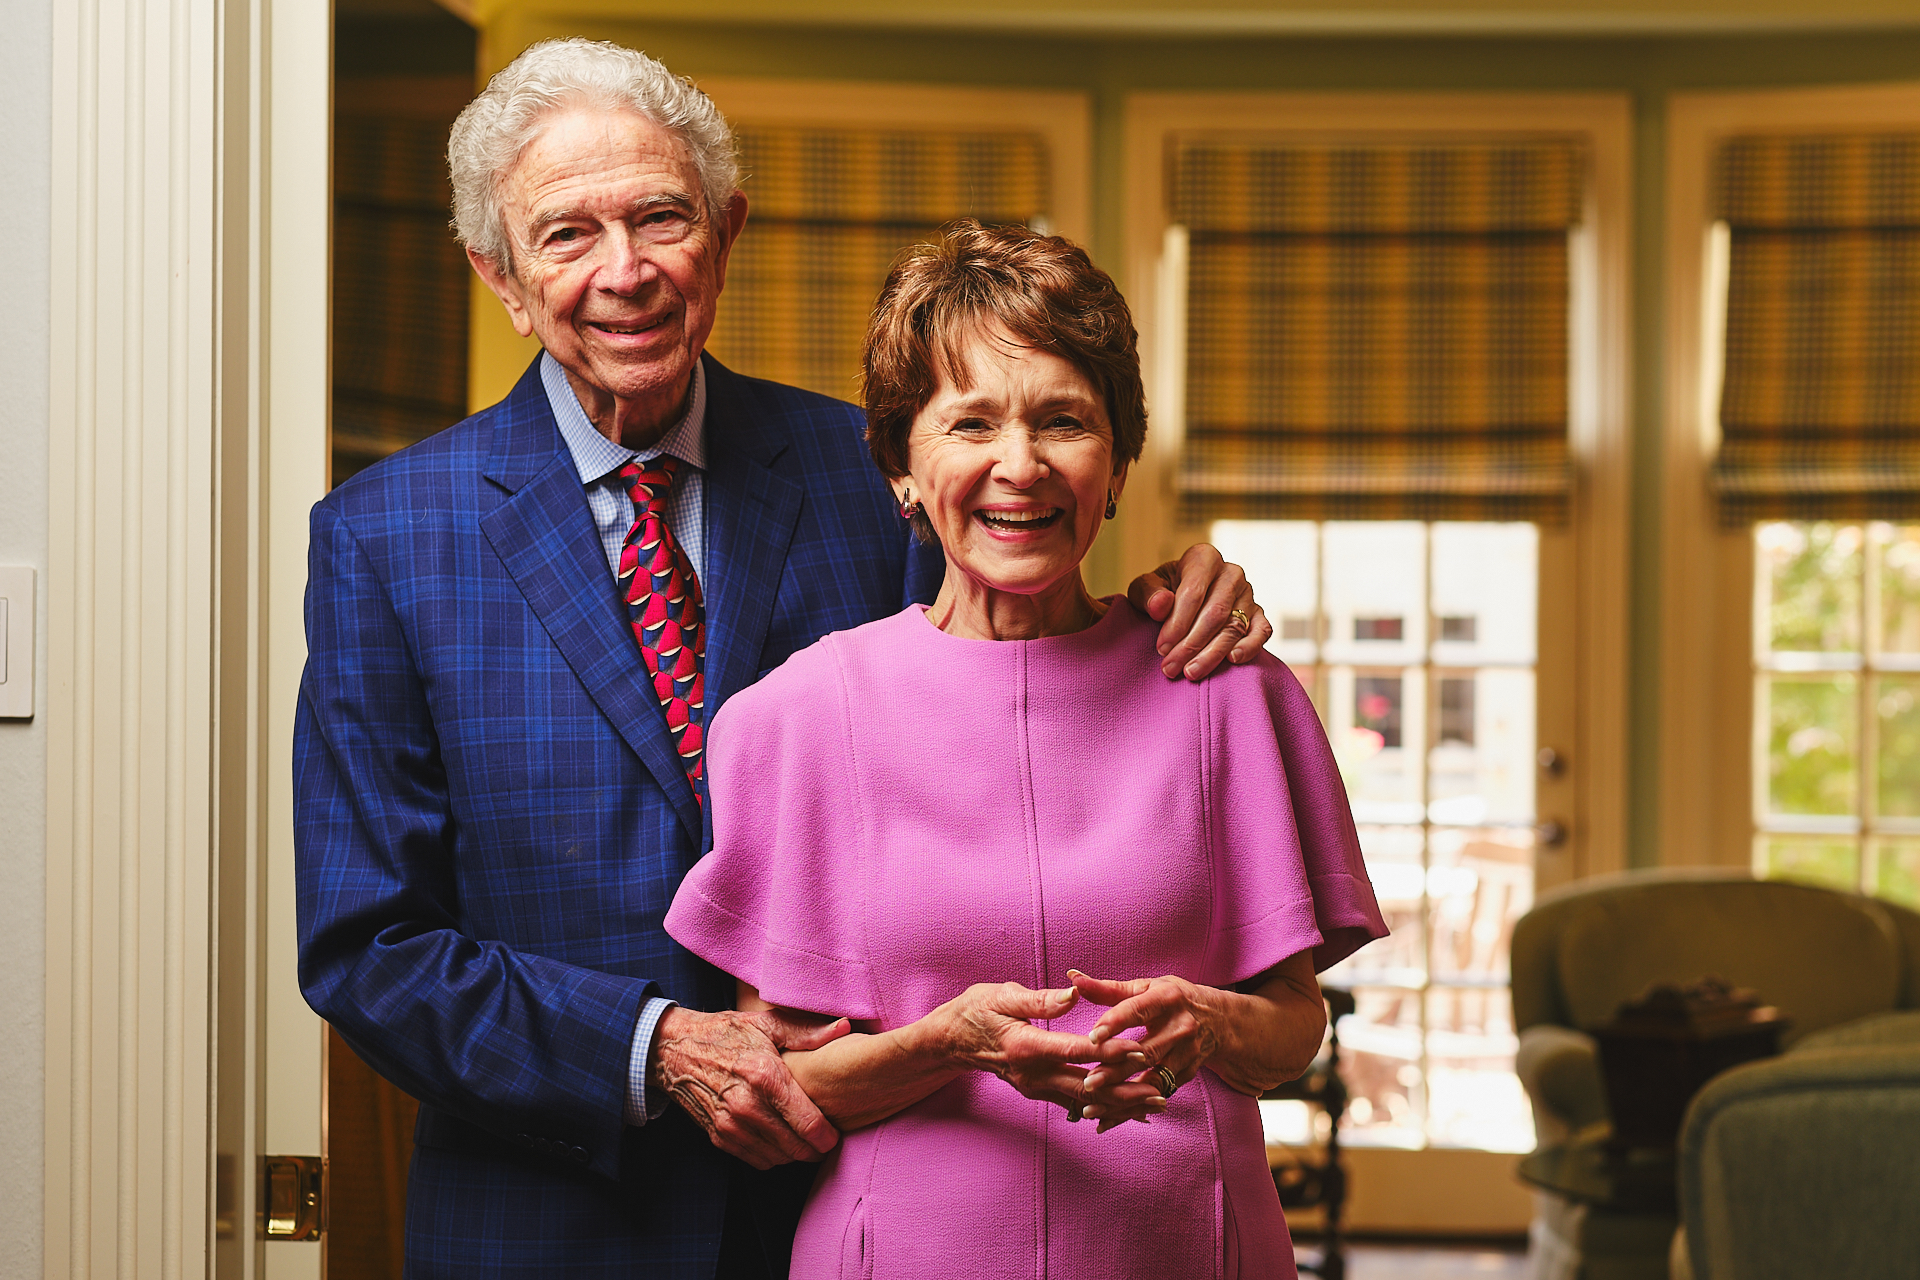 Mary Stewart and Jim Ramsey photographed in their home. They aim to help elderly populations receive the best palliative care possible.